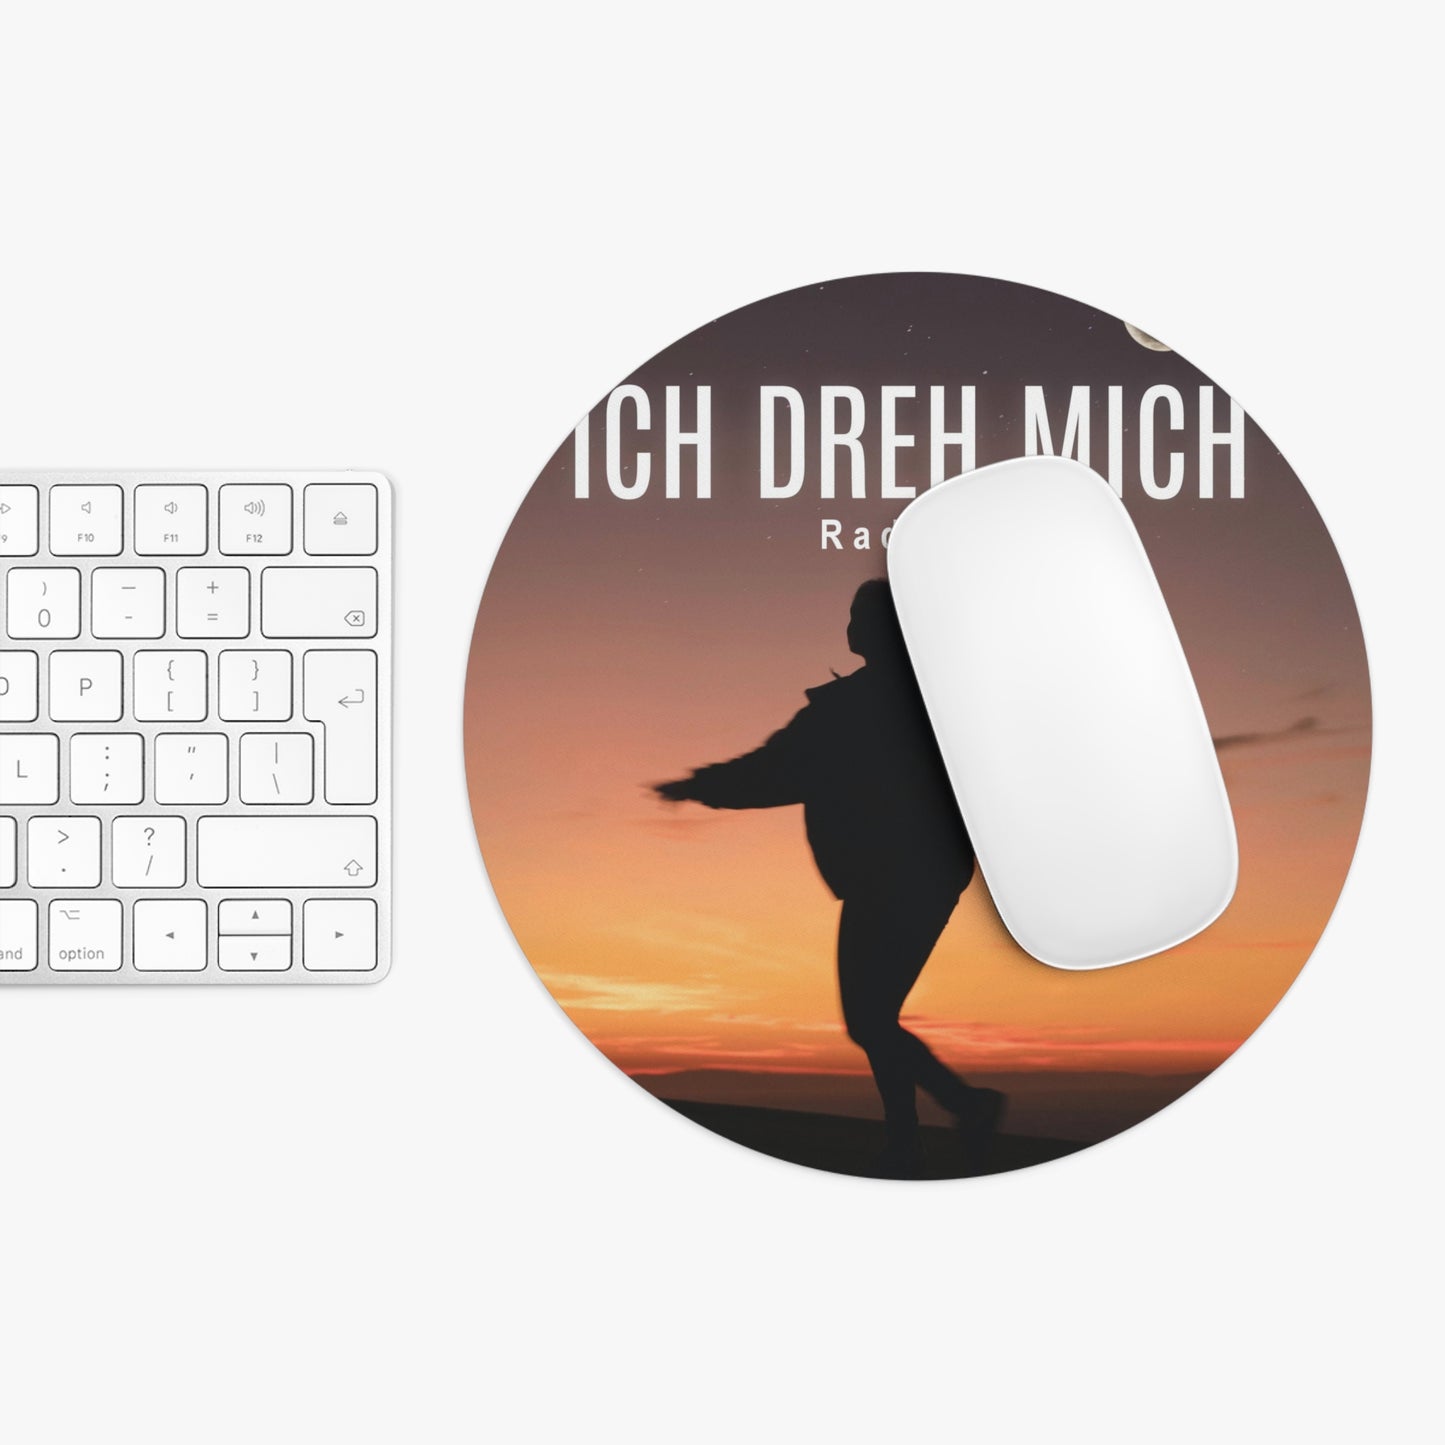 Mouse Pad (Ich dreh mich Mix)